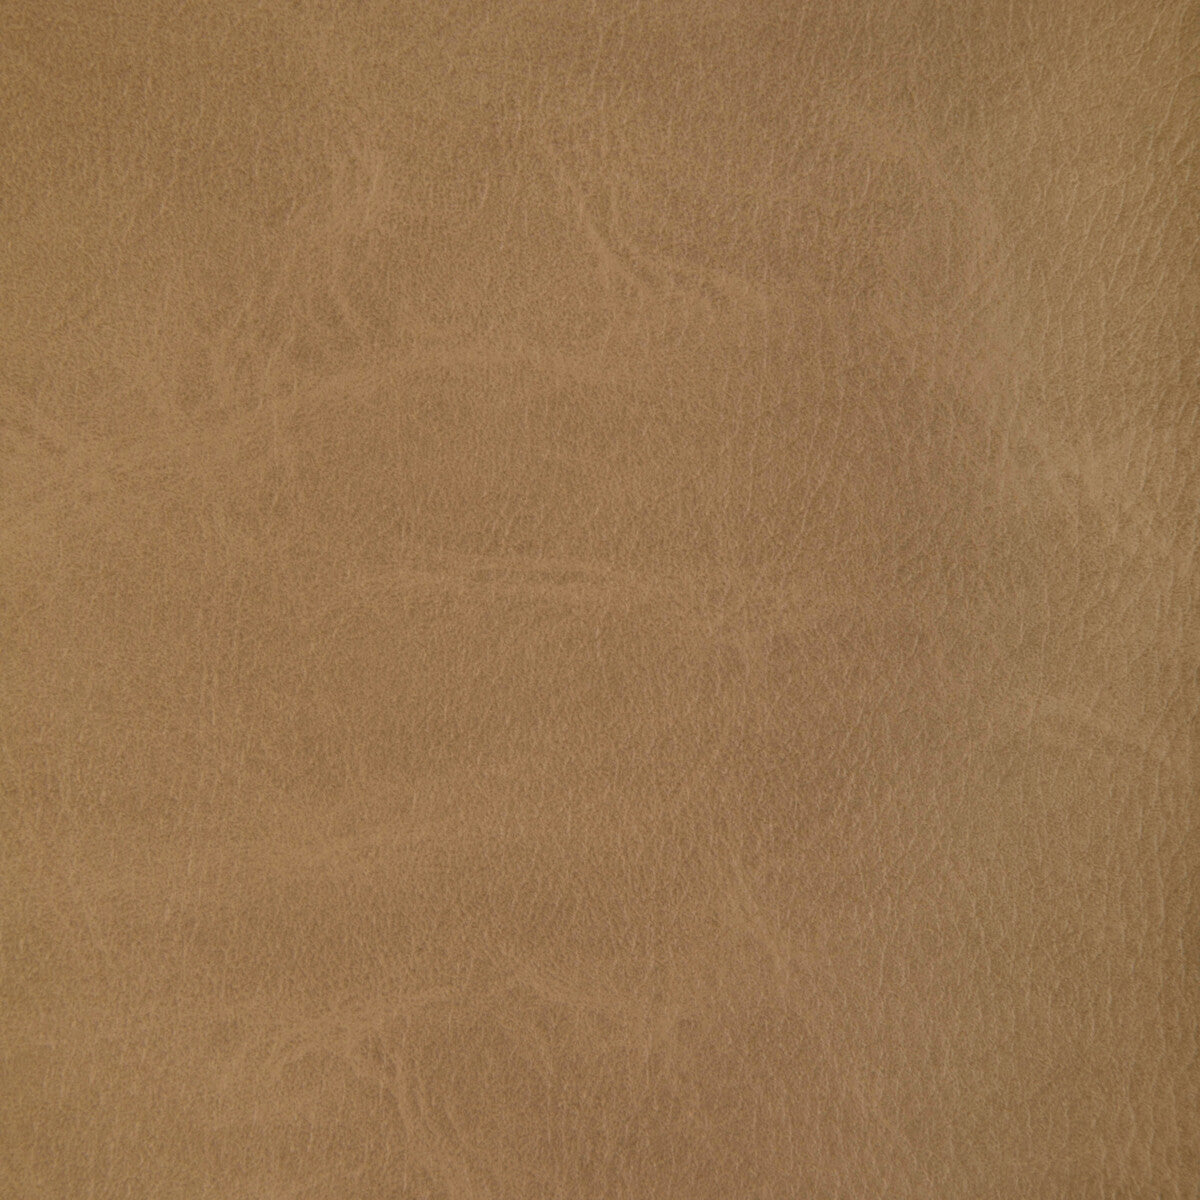 Toni fabric in moccasin color - pattern TONI.16.0 - by Kravet Contract